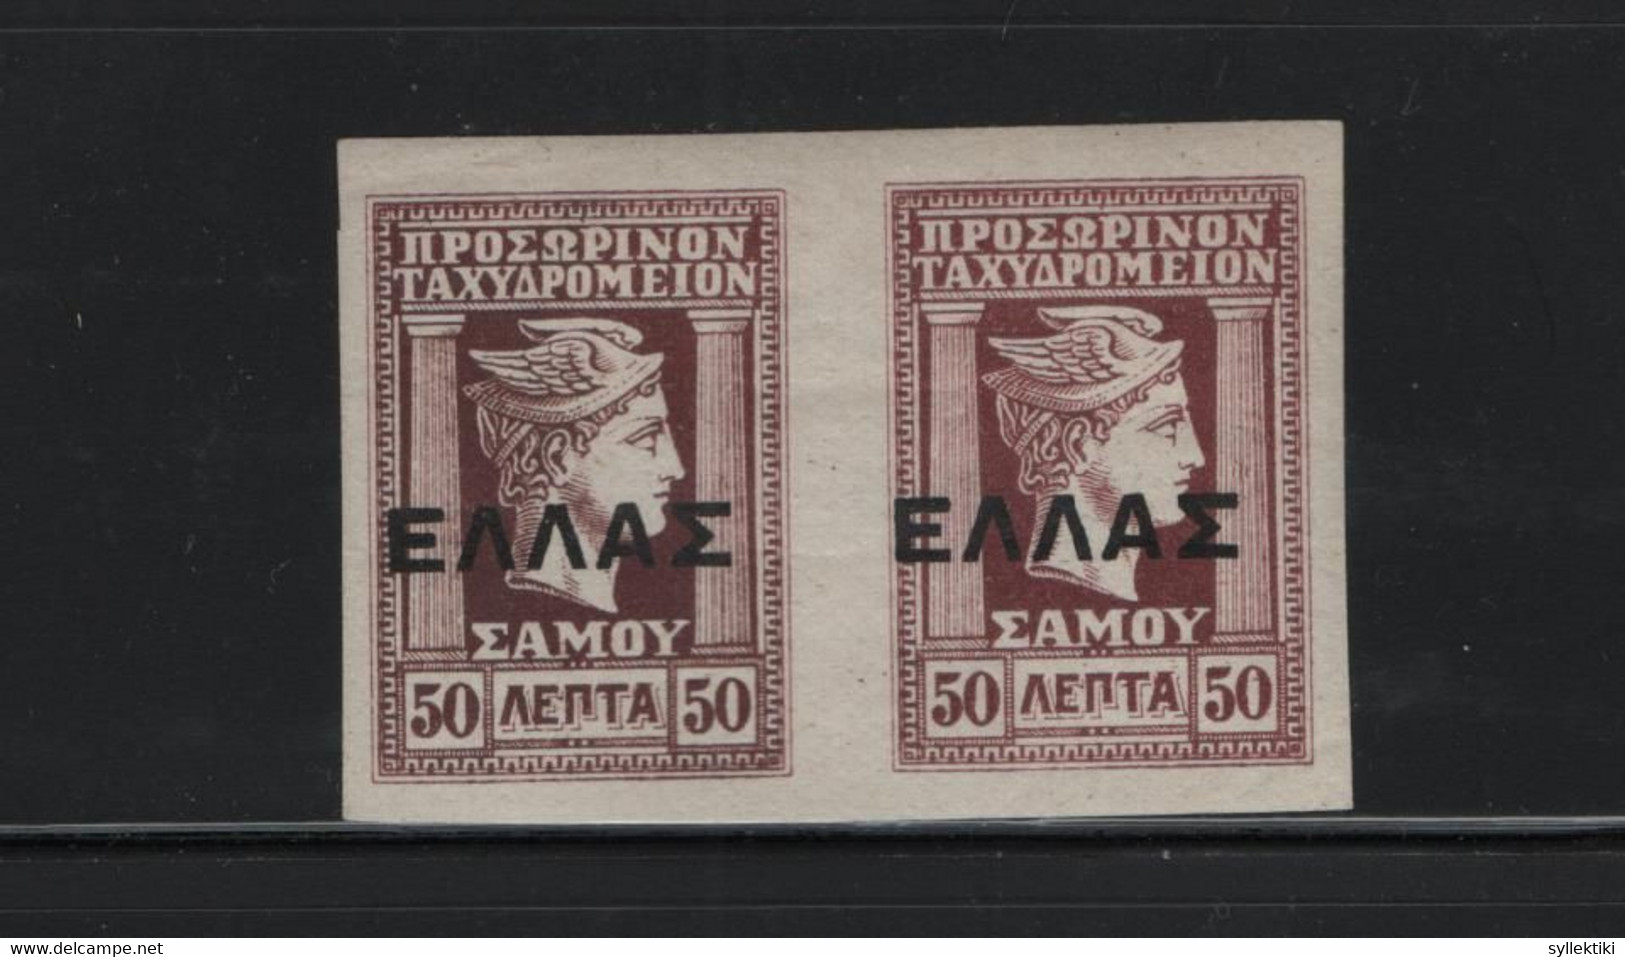 GREECE SAMOS 1912 ΕΛΛΑΣ OVERPRINT 50 LEPTA MNH PAIR STAMPS  IMPERFORATED   HELLAS No 23a AND VALUE EURO 300.00 - Samos